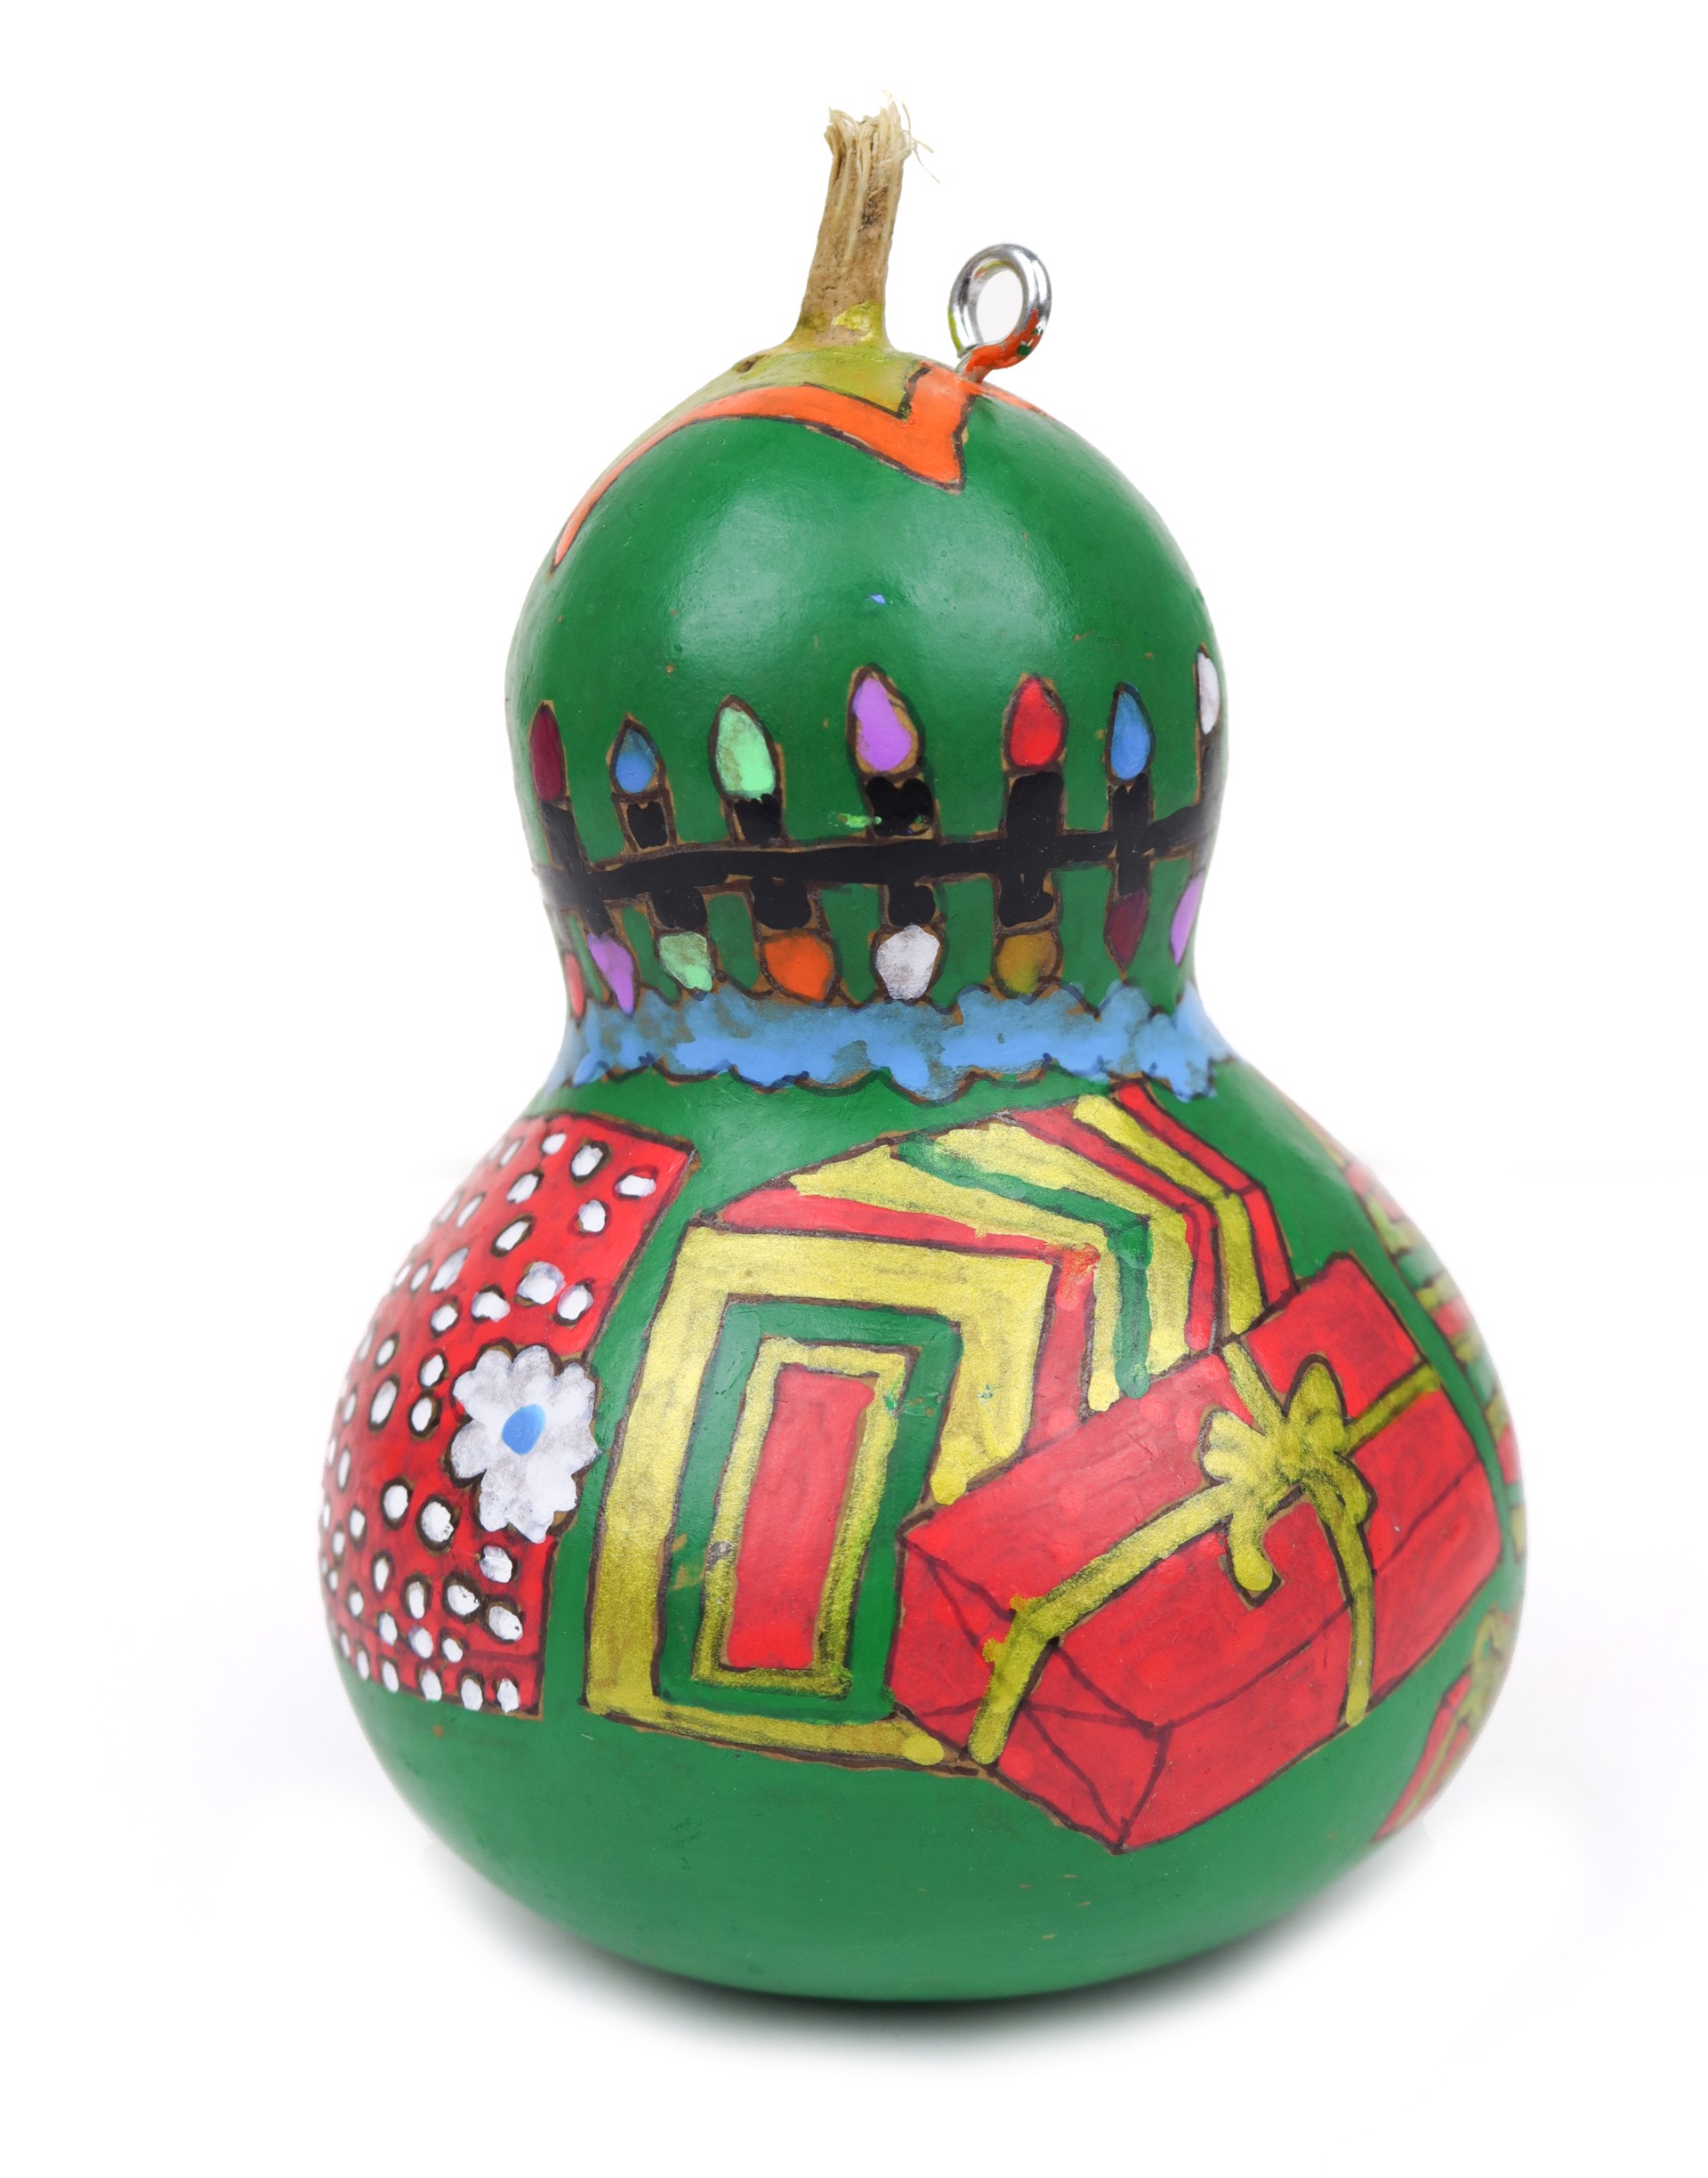 Under the Giving Tree (gourd ornament) by Jacqueline Coleman